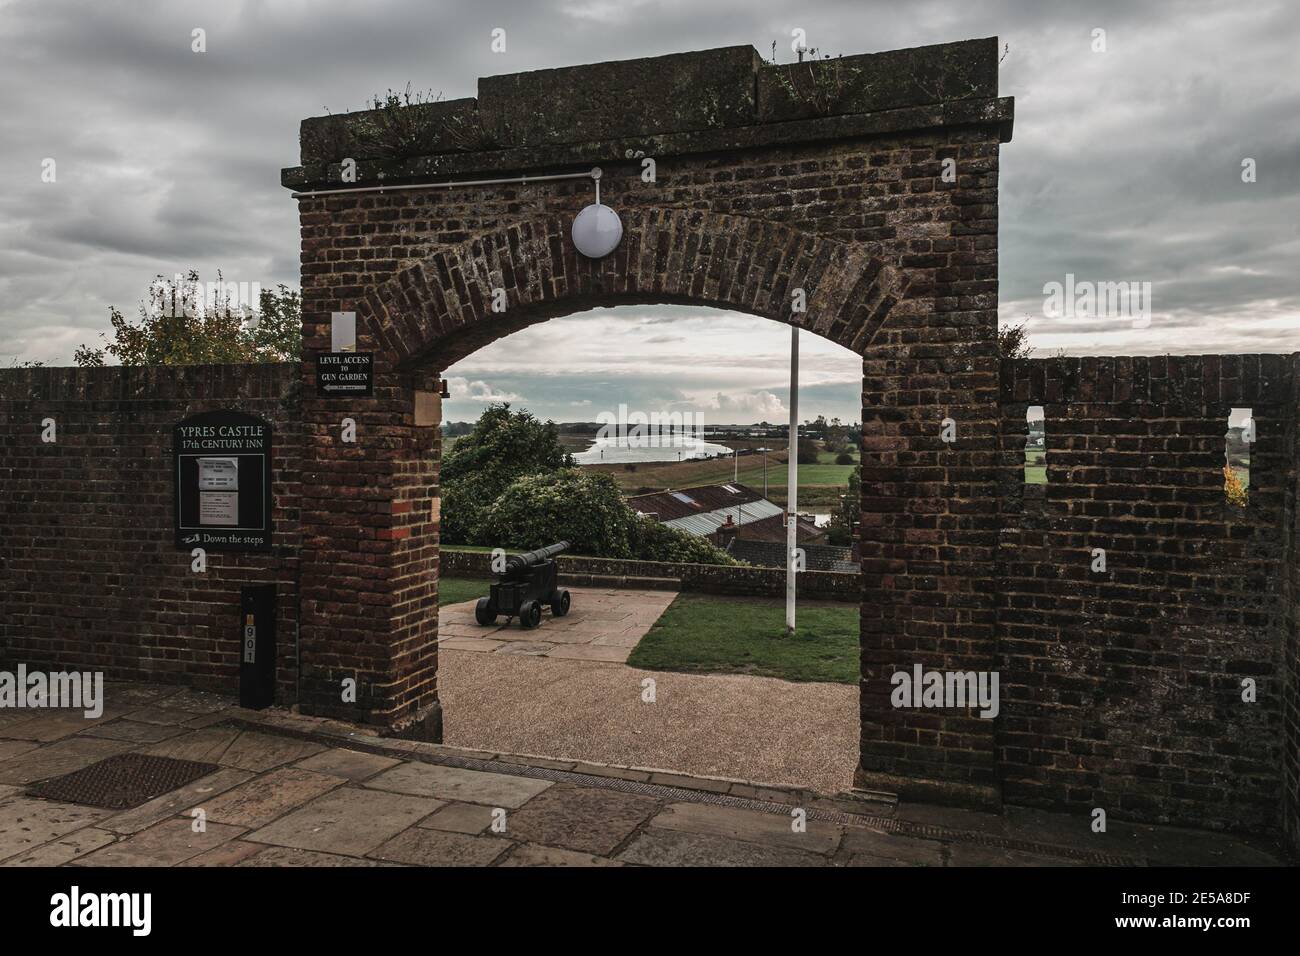 View of the gate which separates Rye Castle from its Gun Garden with a cannon on the background and the view of the River Brede, England, UK. Stock Photo